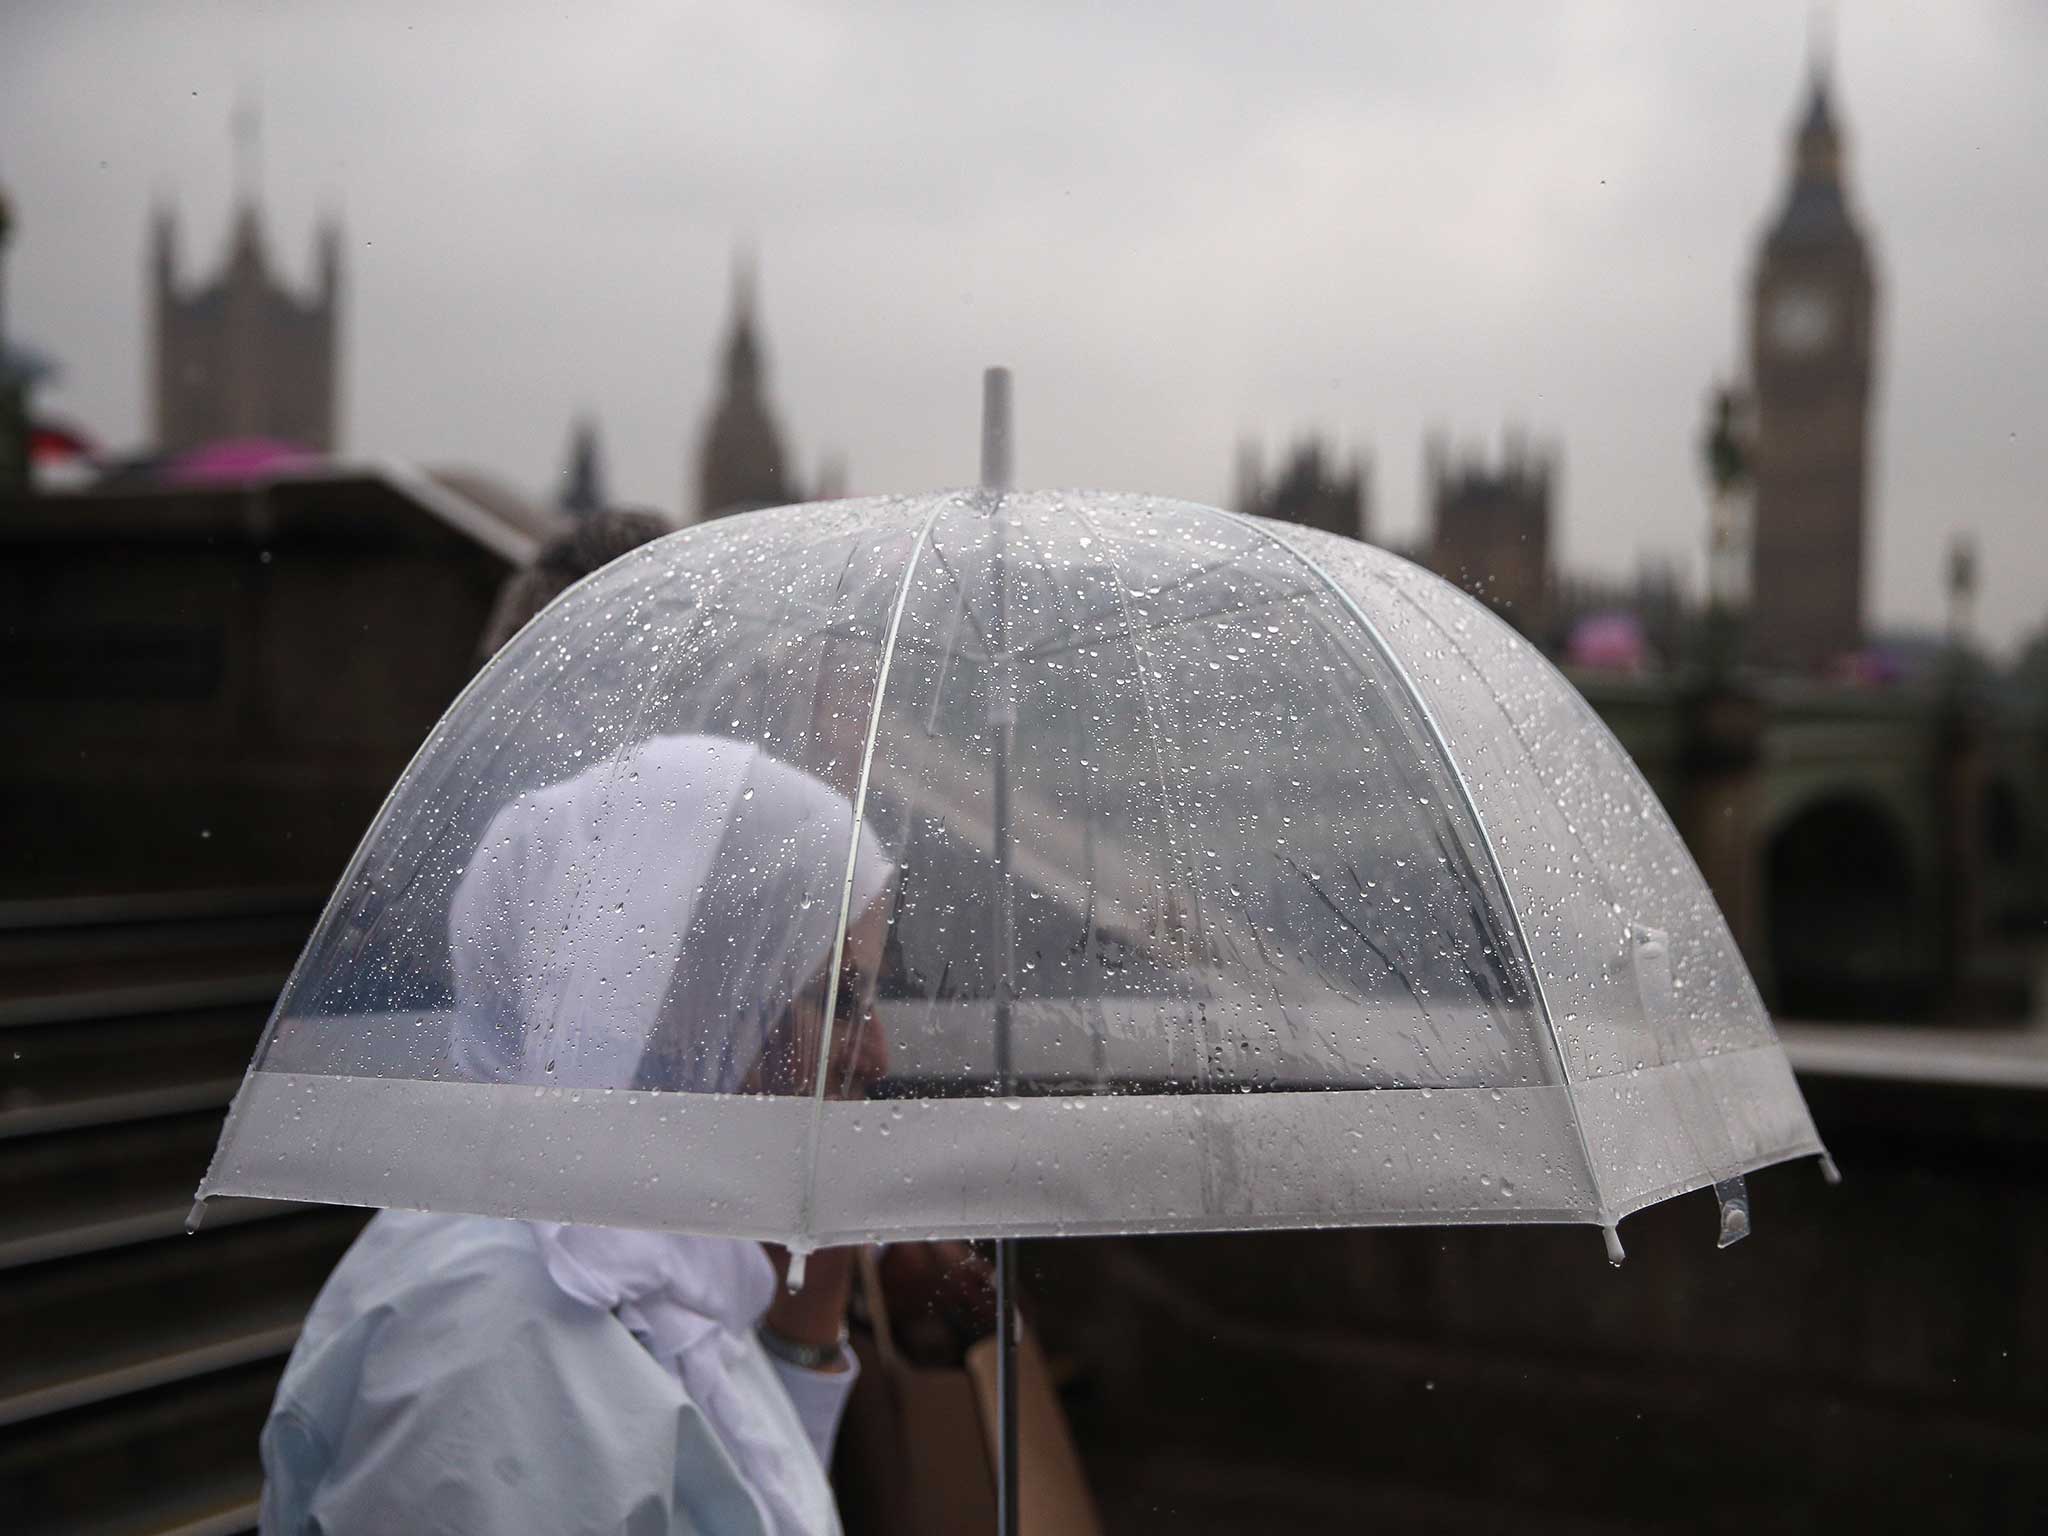 A tourist in London shelters under an umbrella during a downpour